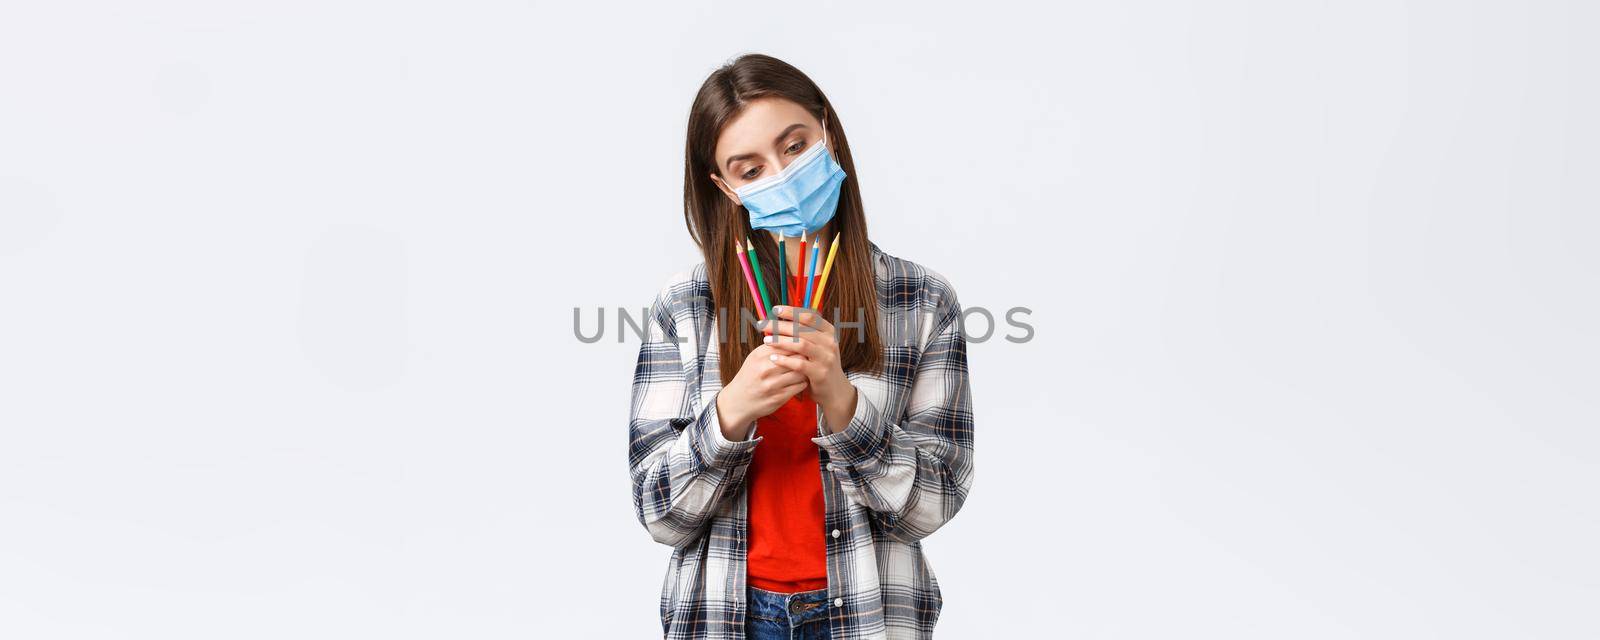 Social distancing, leisure and hobbies on covid-19 outbreak, coronavirus concept. Thoughtful cute, dreamy woman in medical mask decide which colored pencil choose, pondering what draw.